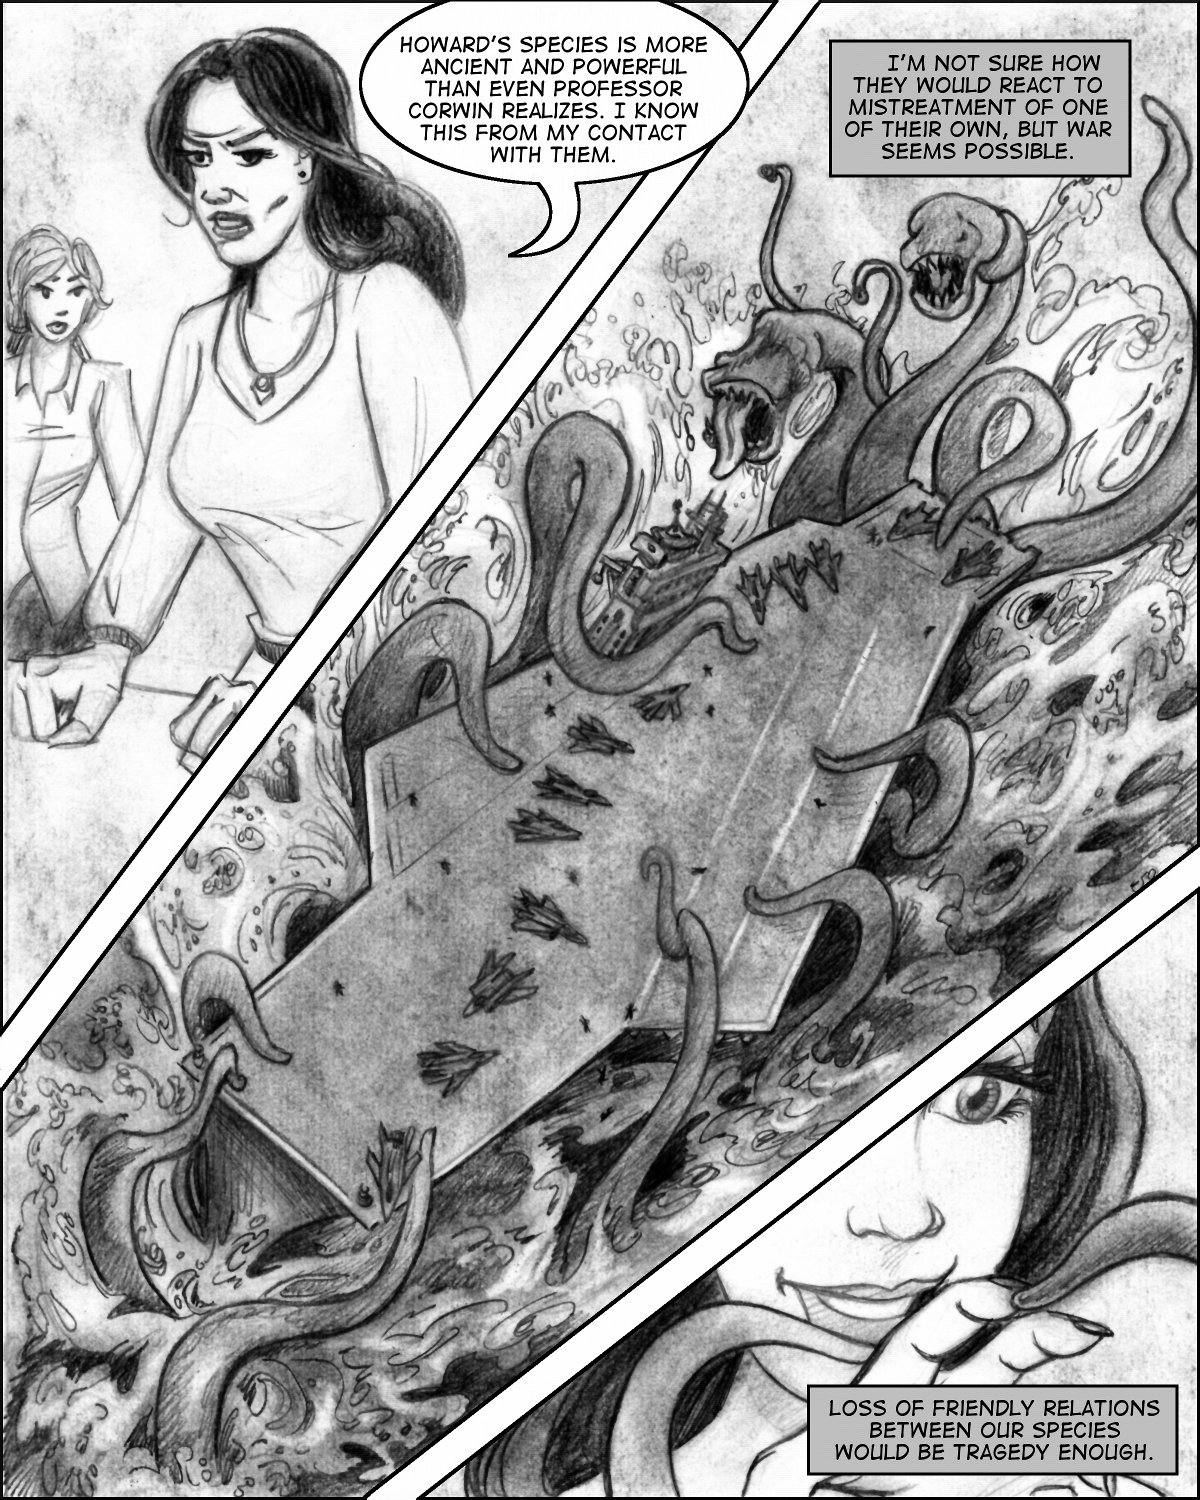 Giant tentacles attack an aircraft carrier!